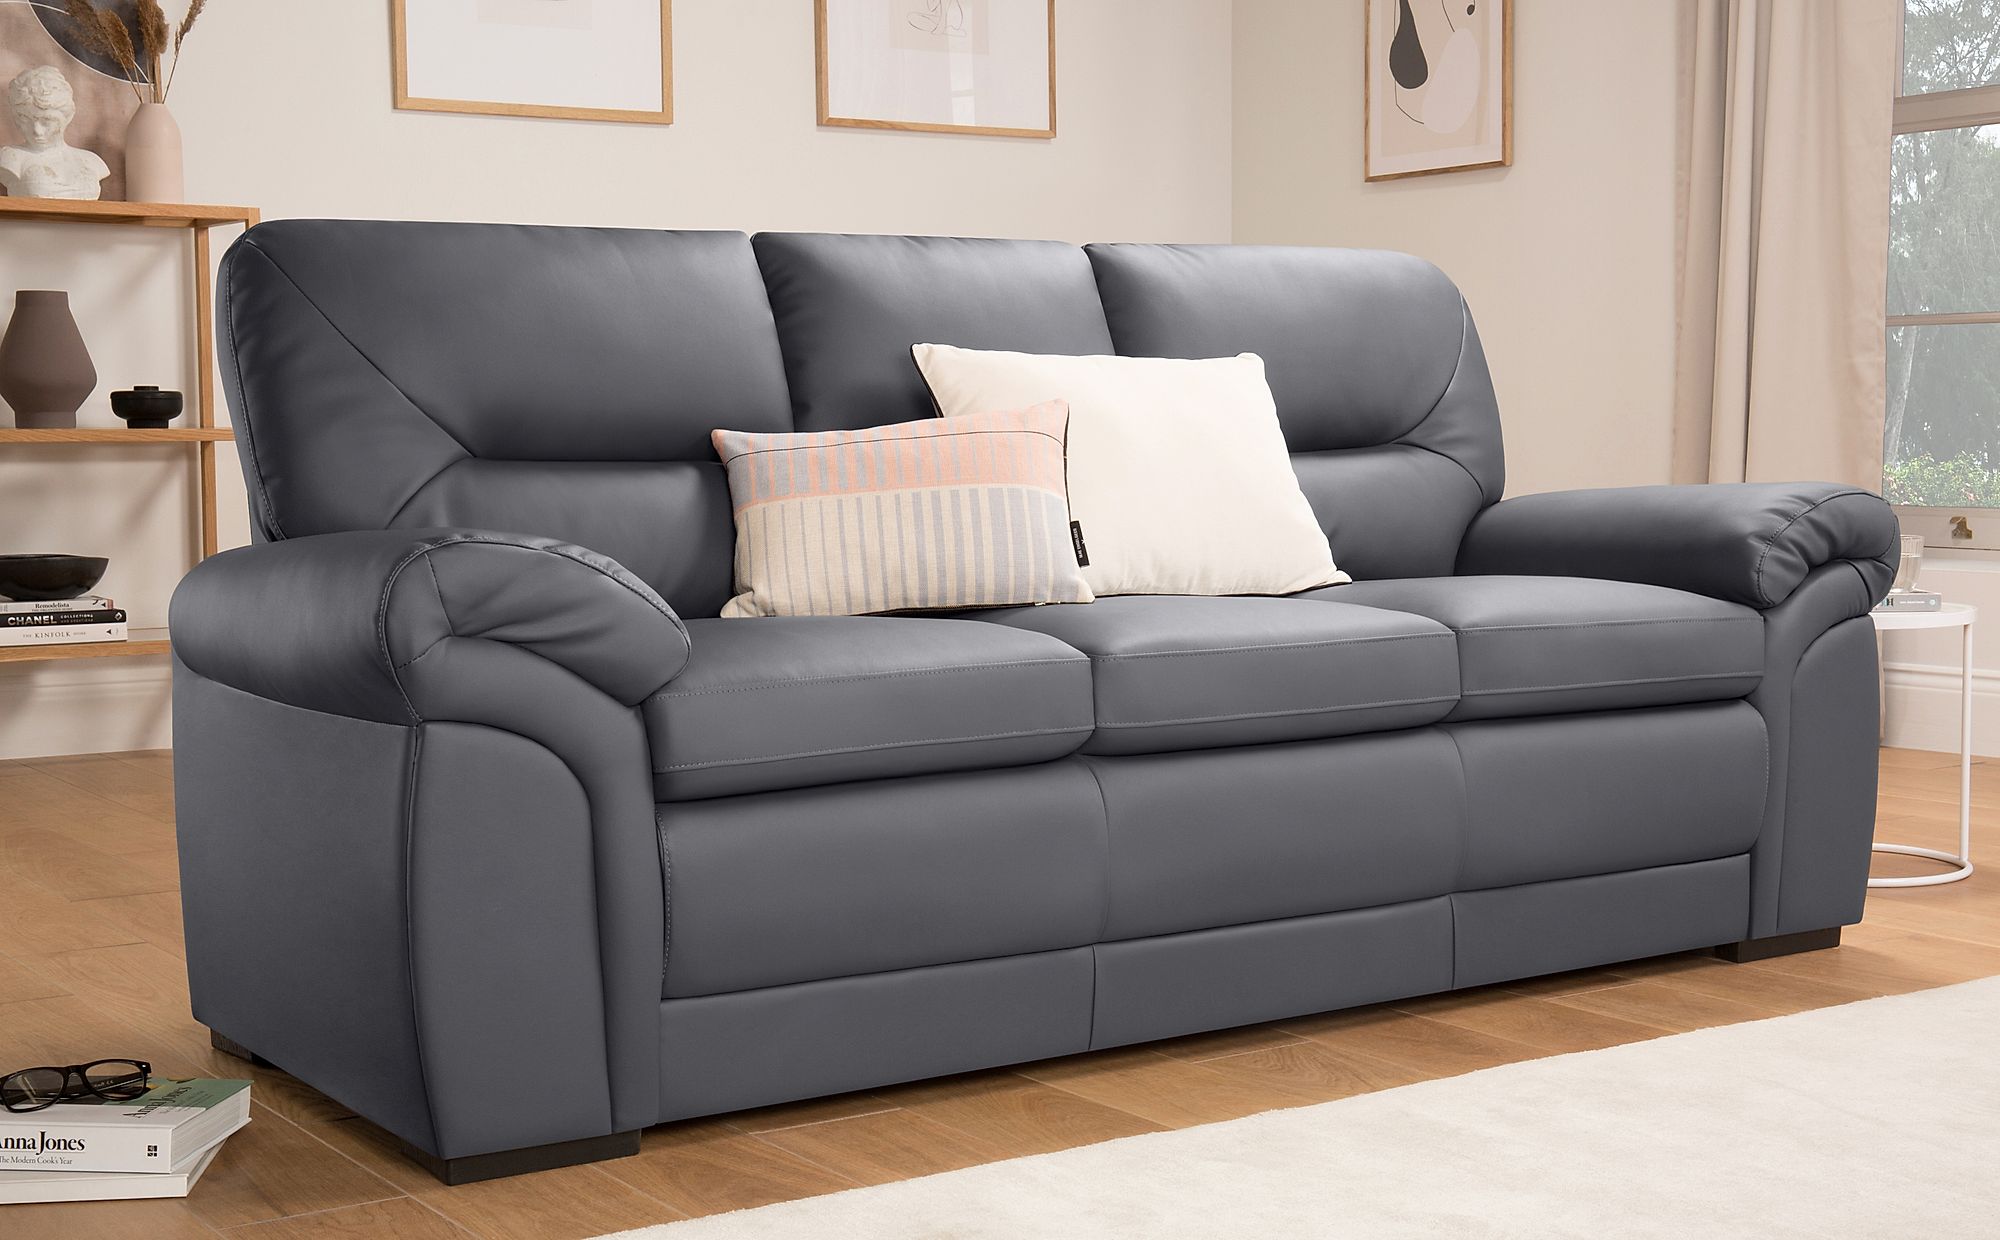 Bromley Grey Leather 3 Seater Sofa | Furniture Choice